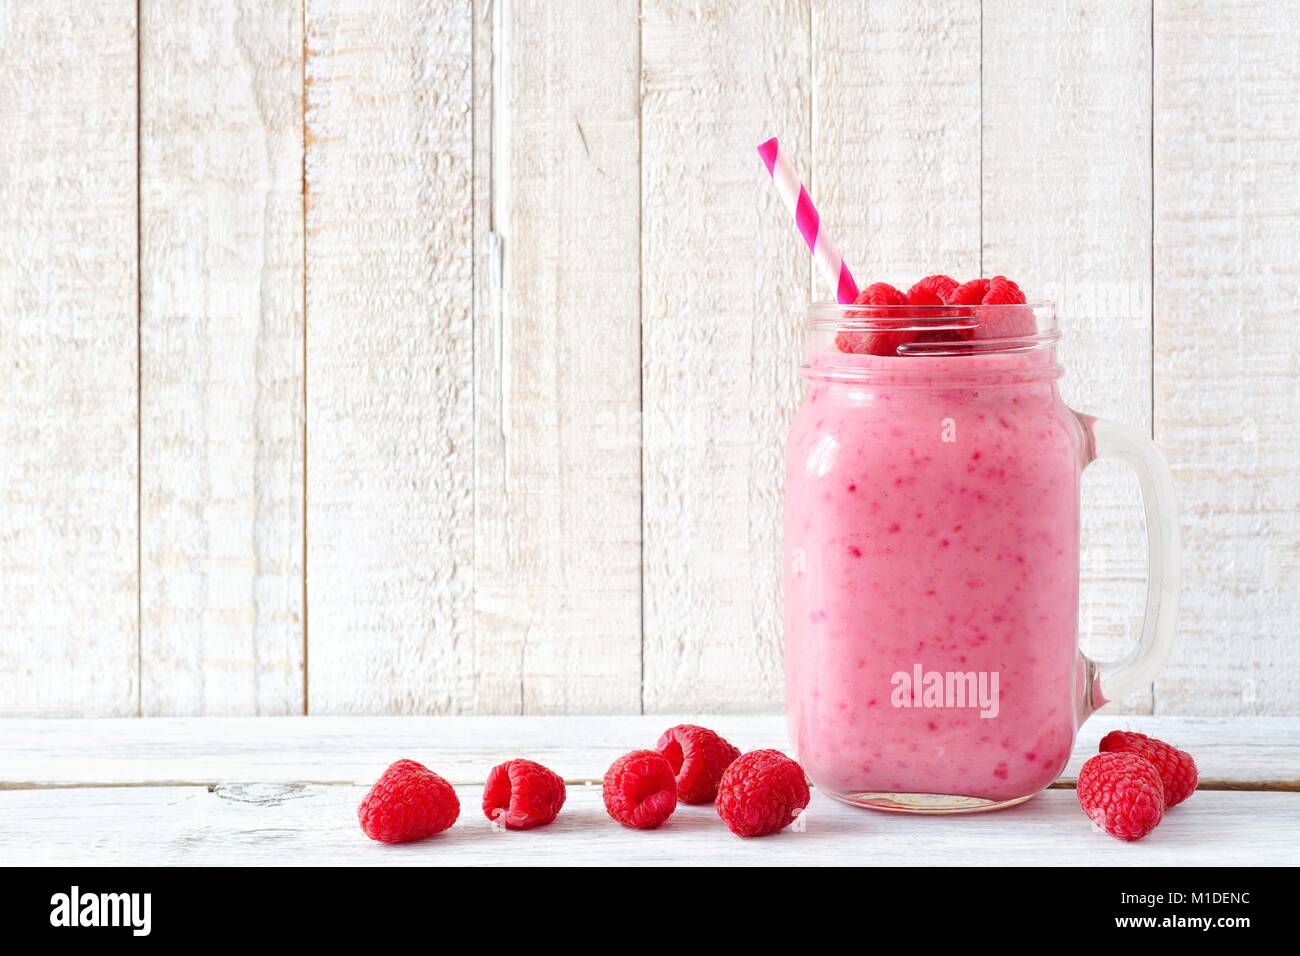 Healthy raspberry smoothie in a mason jar glass with scattered berries over a white wood background Stock Photo